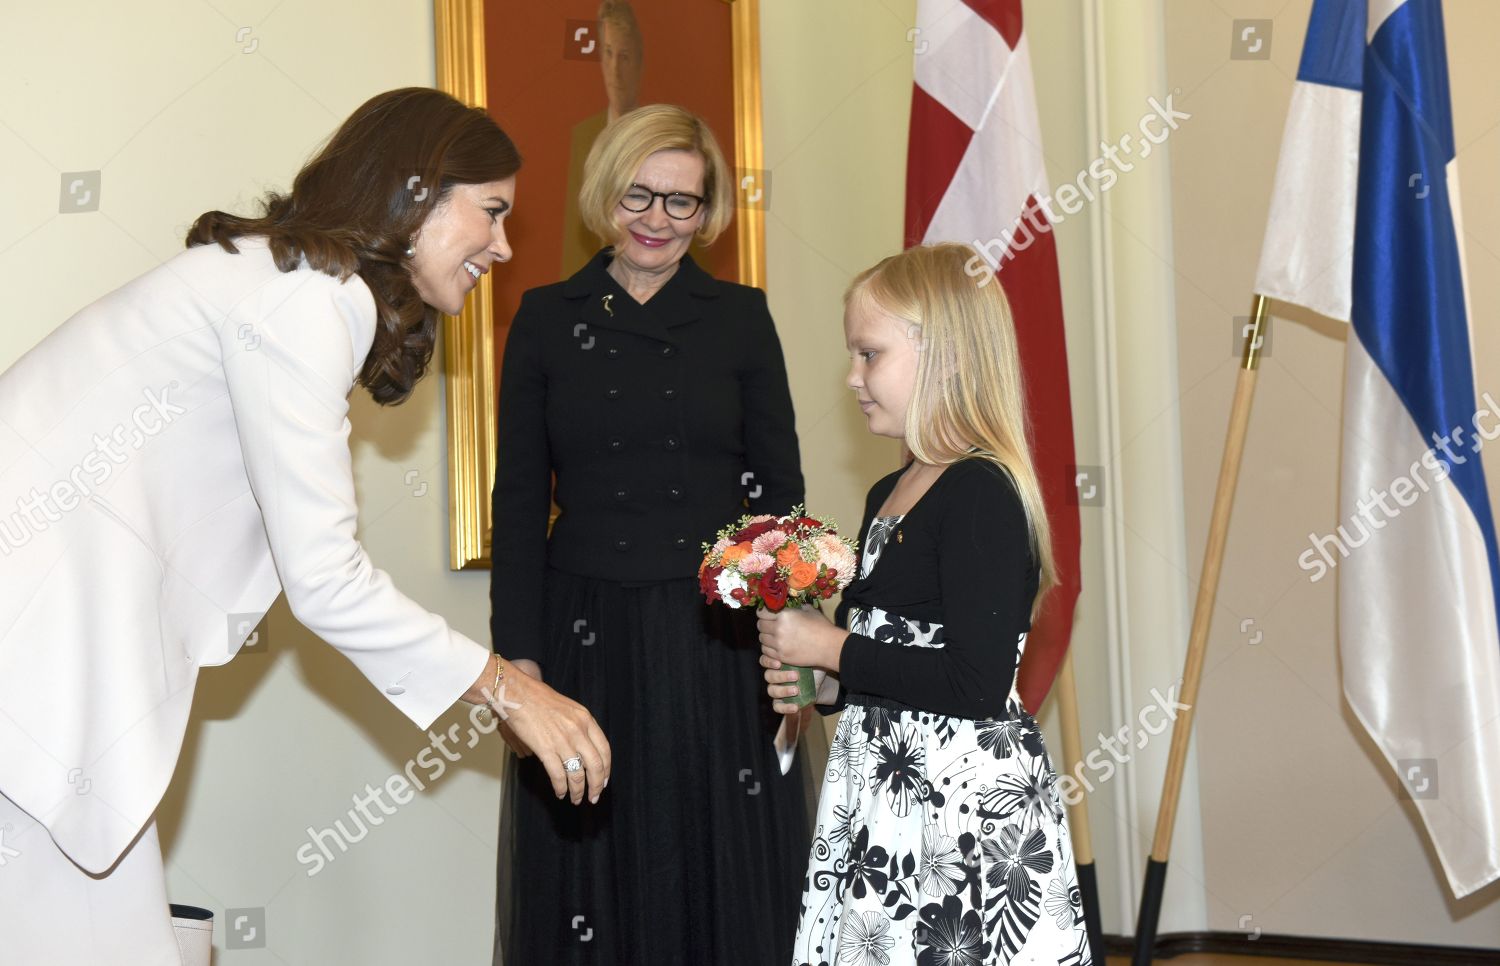 crown-princess-mary-visit-to-finland-shutterstock-editorial-9881095a.jpg